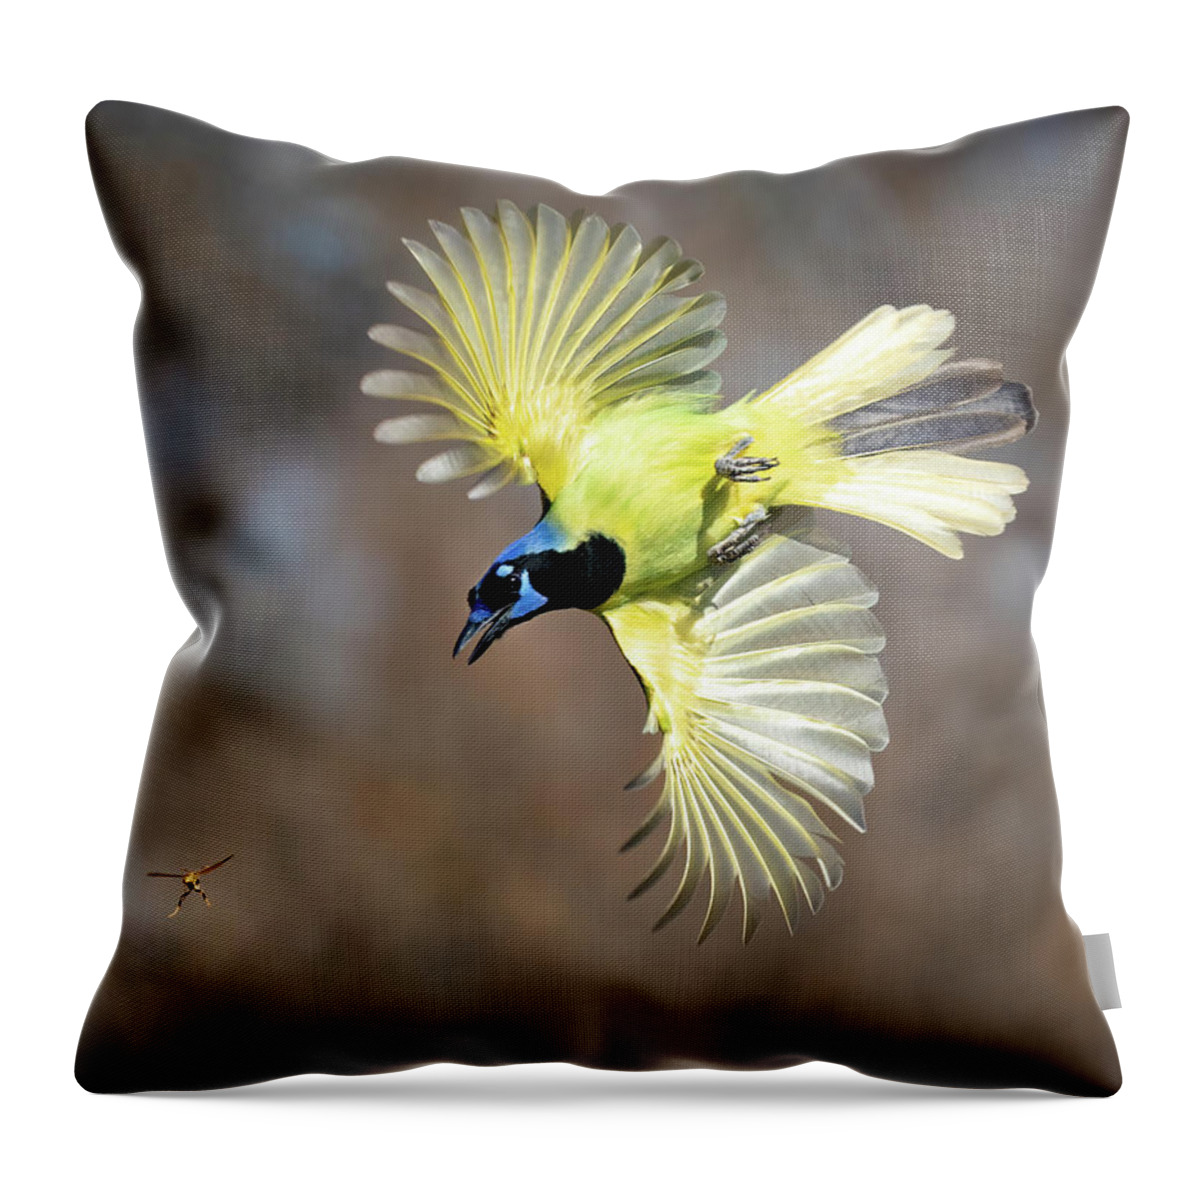 Green Jays Throw Pillow featuring the photograph Green Jay chasing Wasp by Judi Dressler